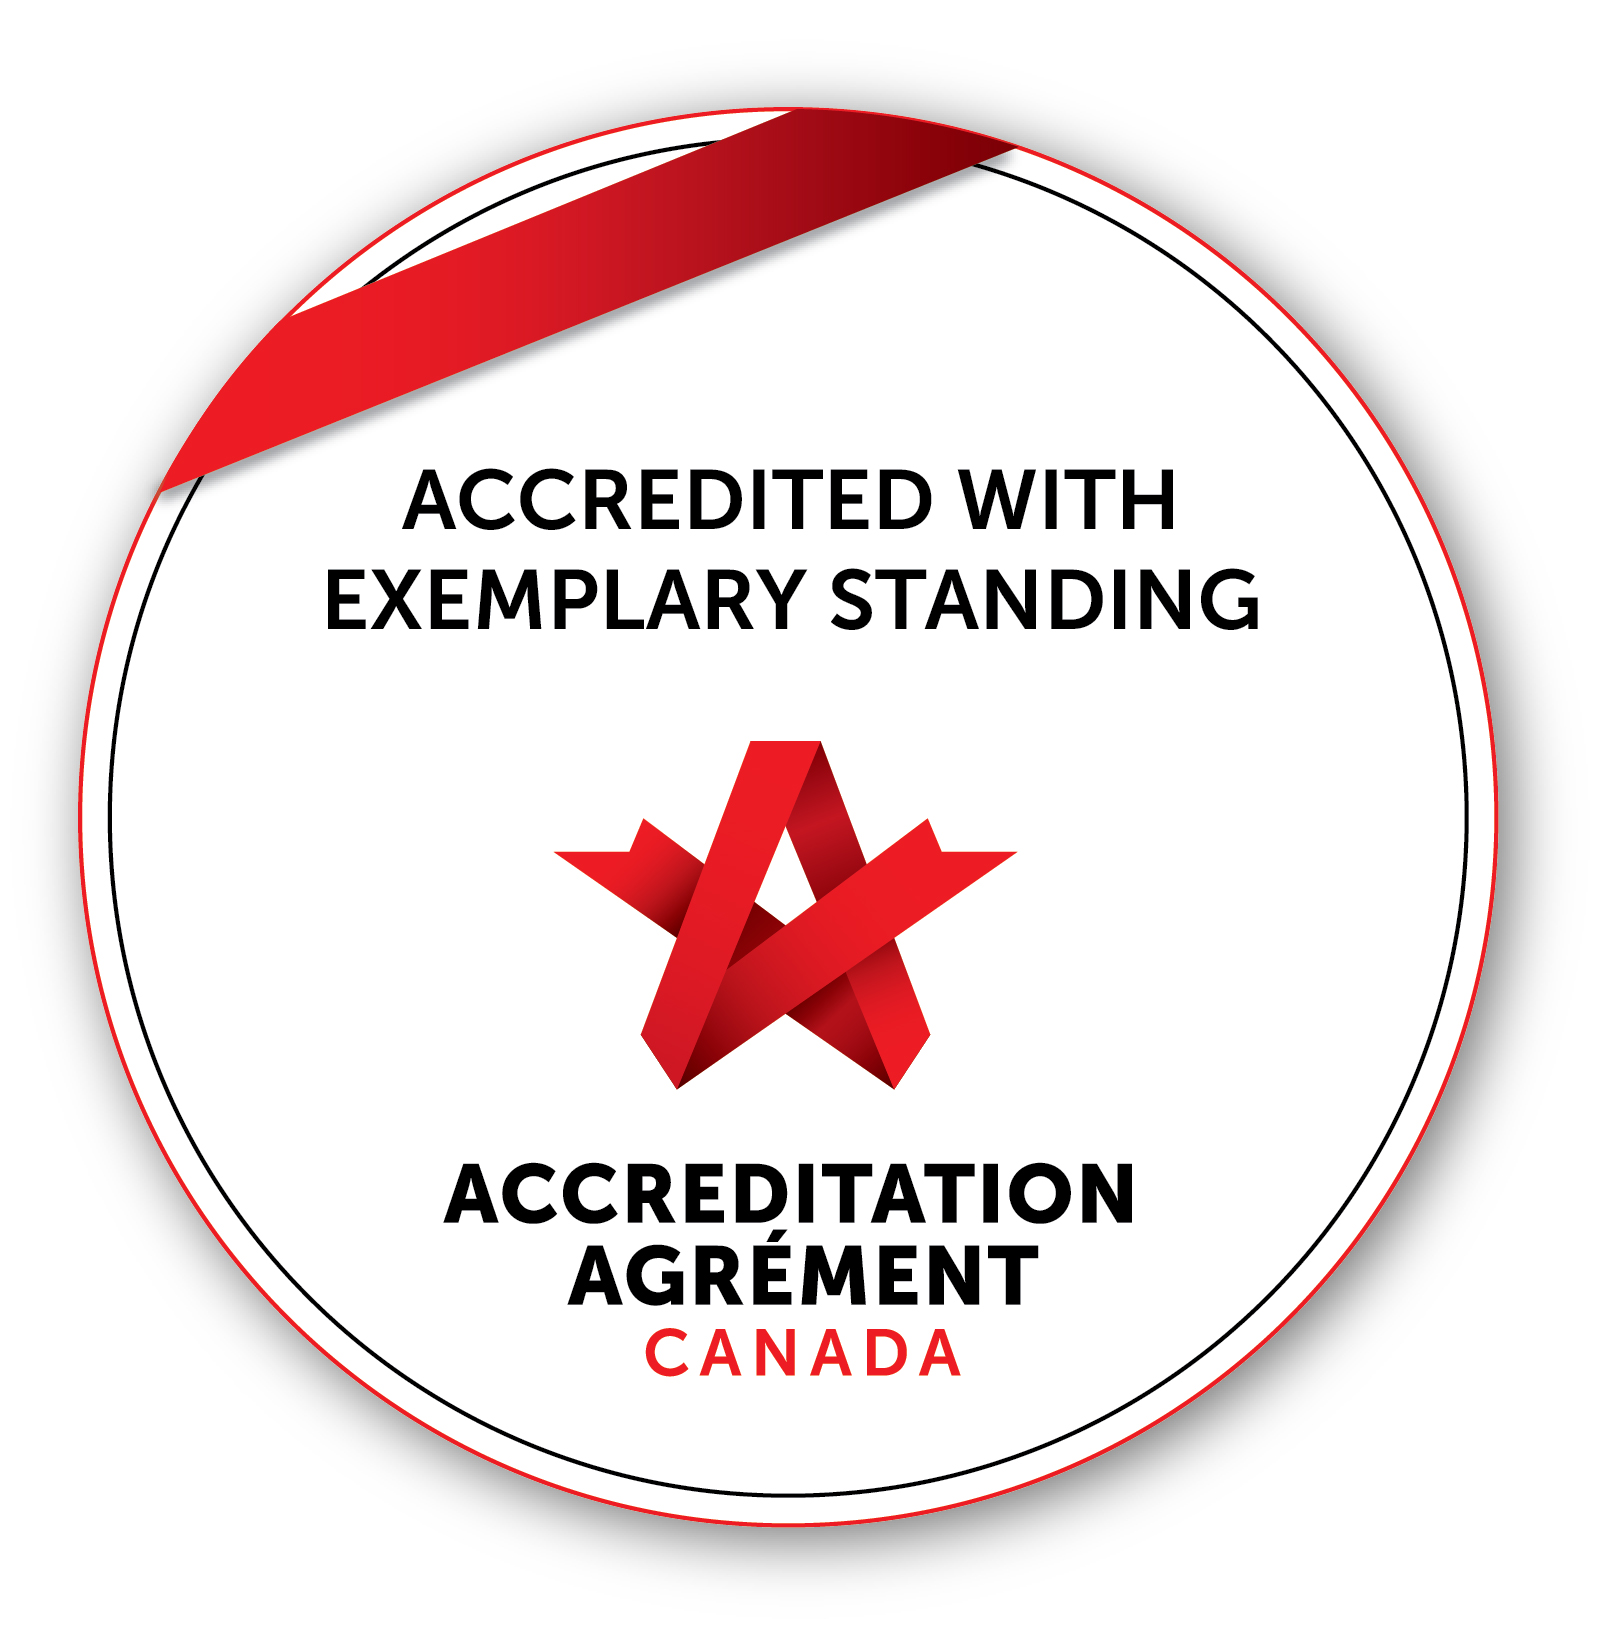 Accreditation Canada Seal: Accredited with Exemplary Standing